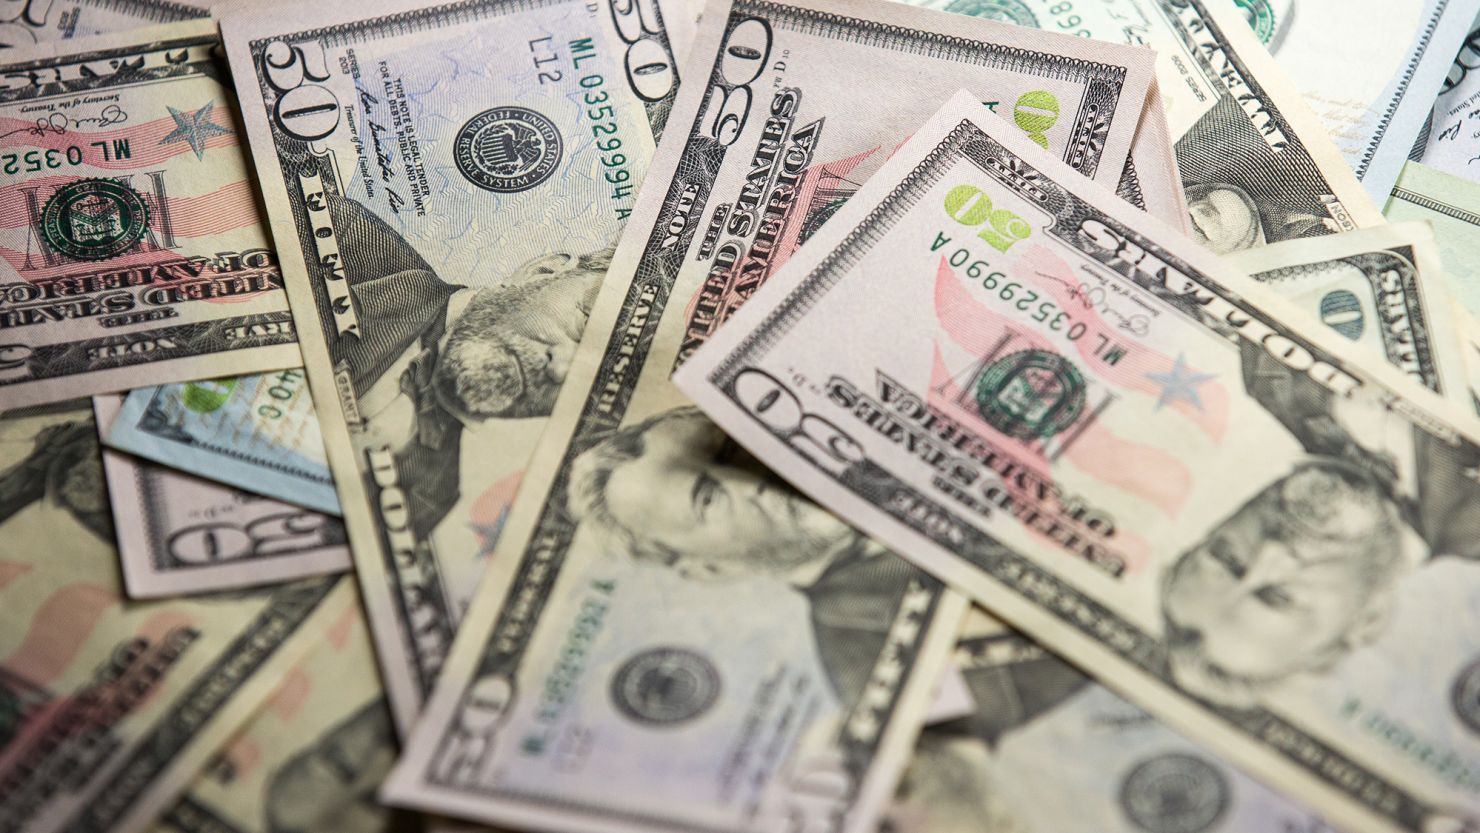 A record number of $50 bills were printed last year. It's not why